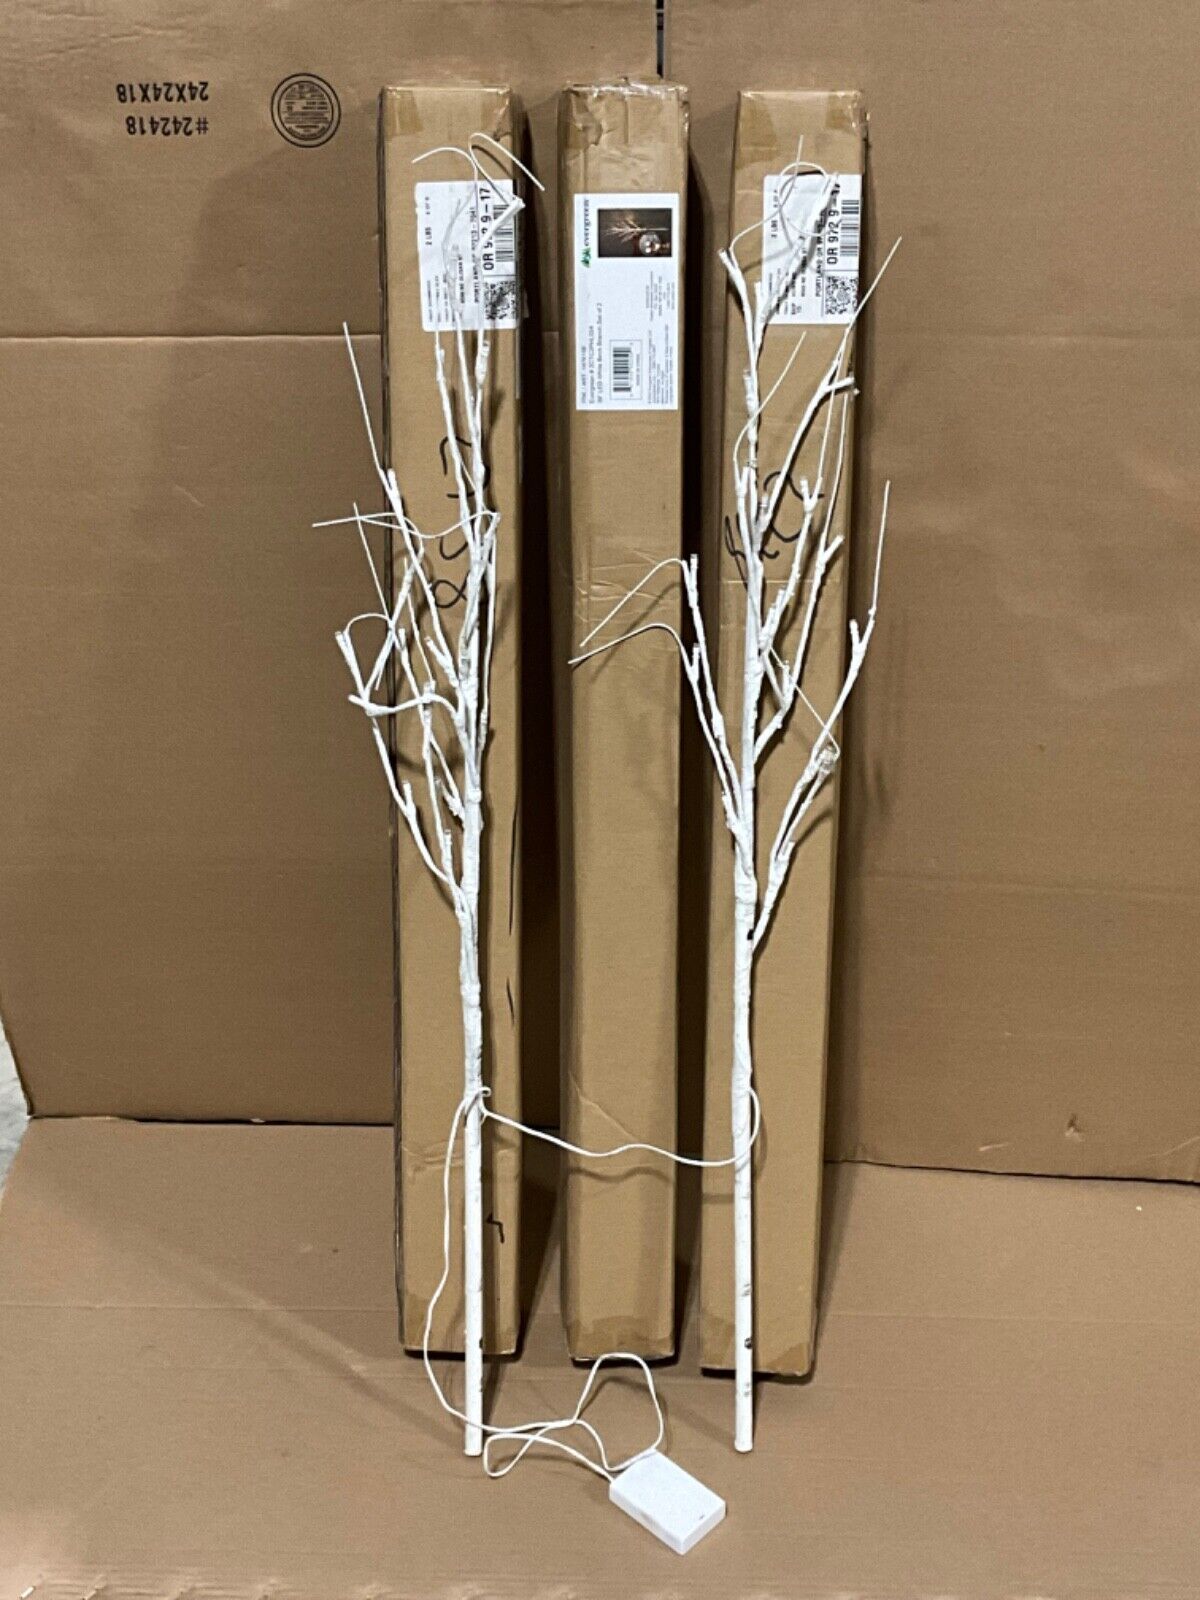 (3) EVERGREEN BATTERY OPERATED WHITE LED LIGHT BIRCH BRANCH, TREES, 39” TALL NEW